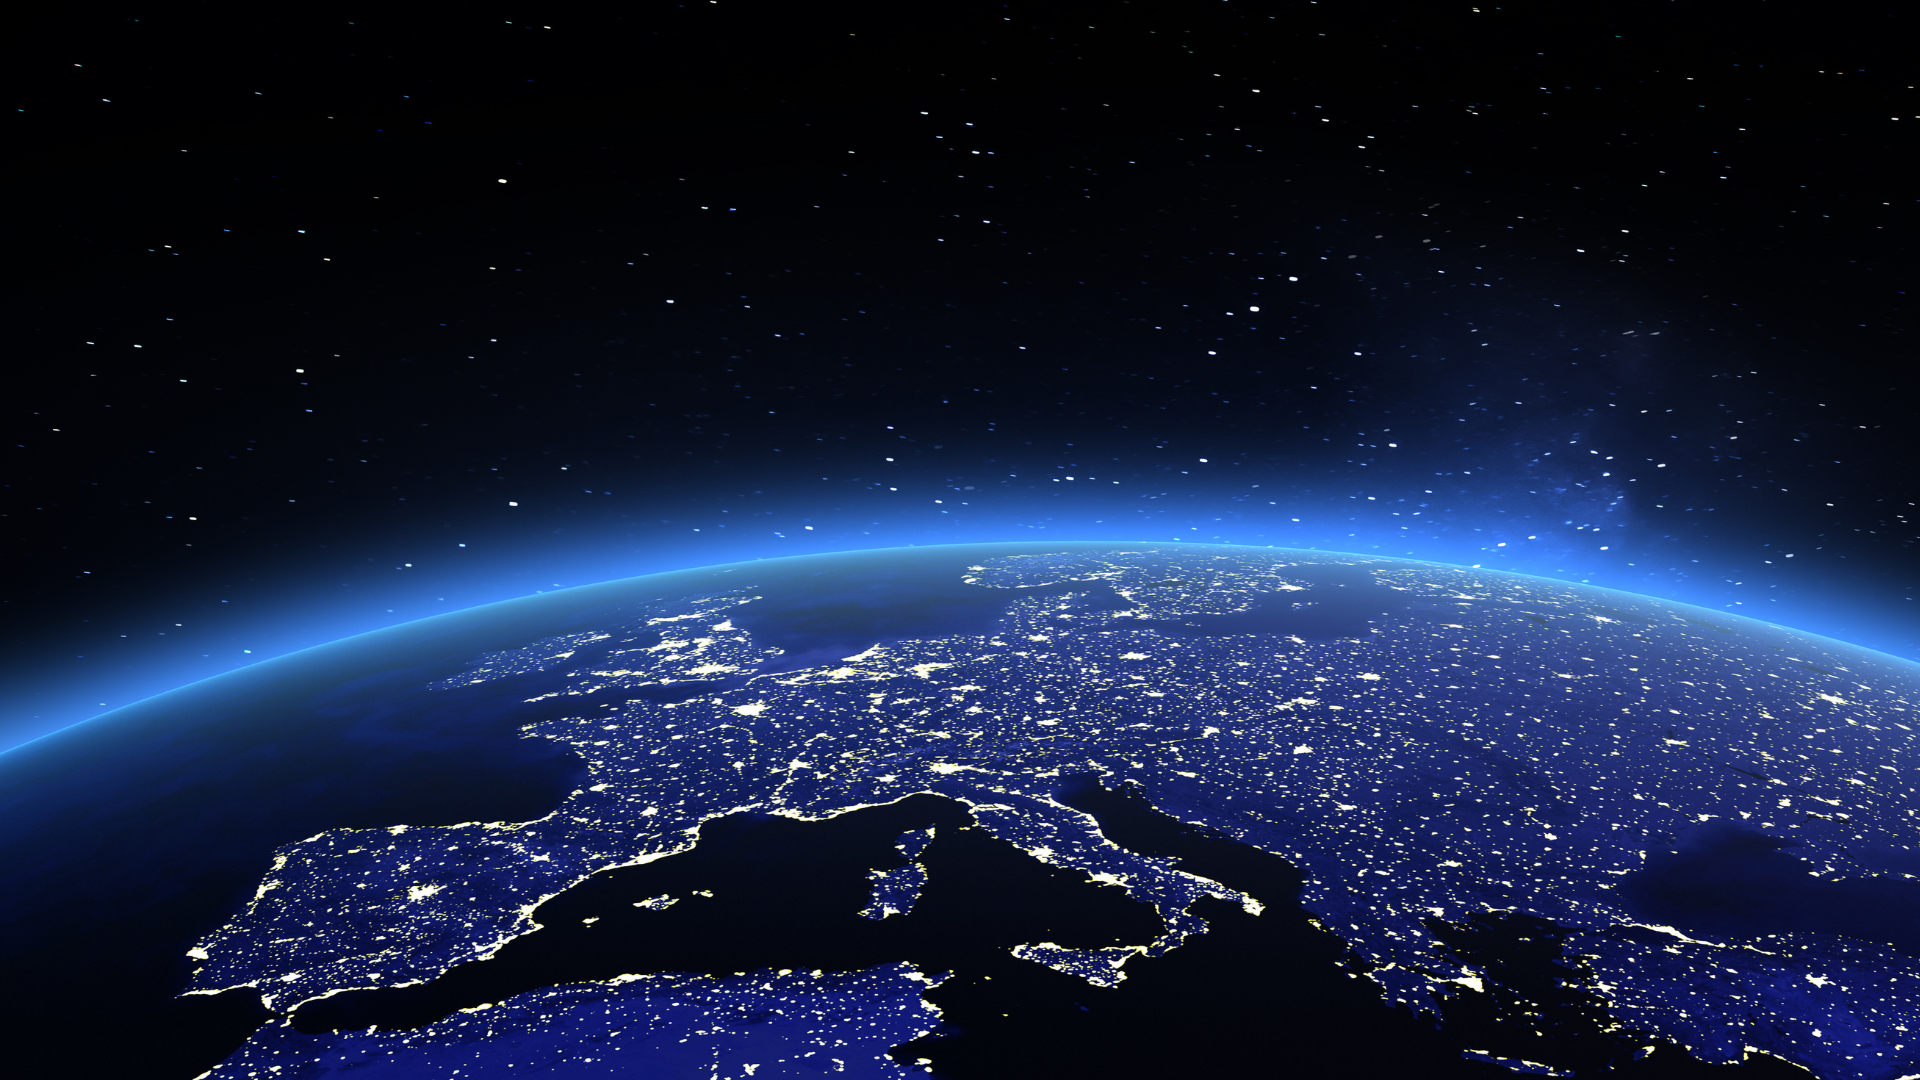 Access Alert | Slovenia seeks stakeholder opinions on Space Strategy 2030